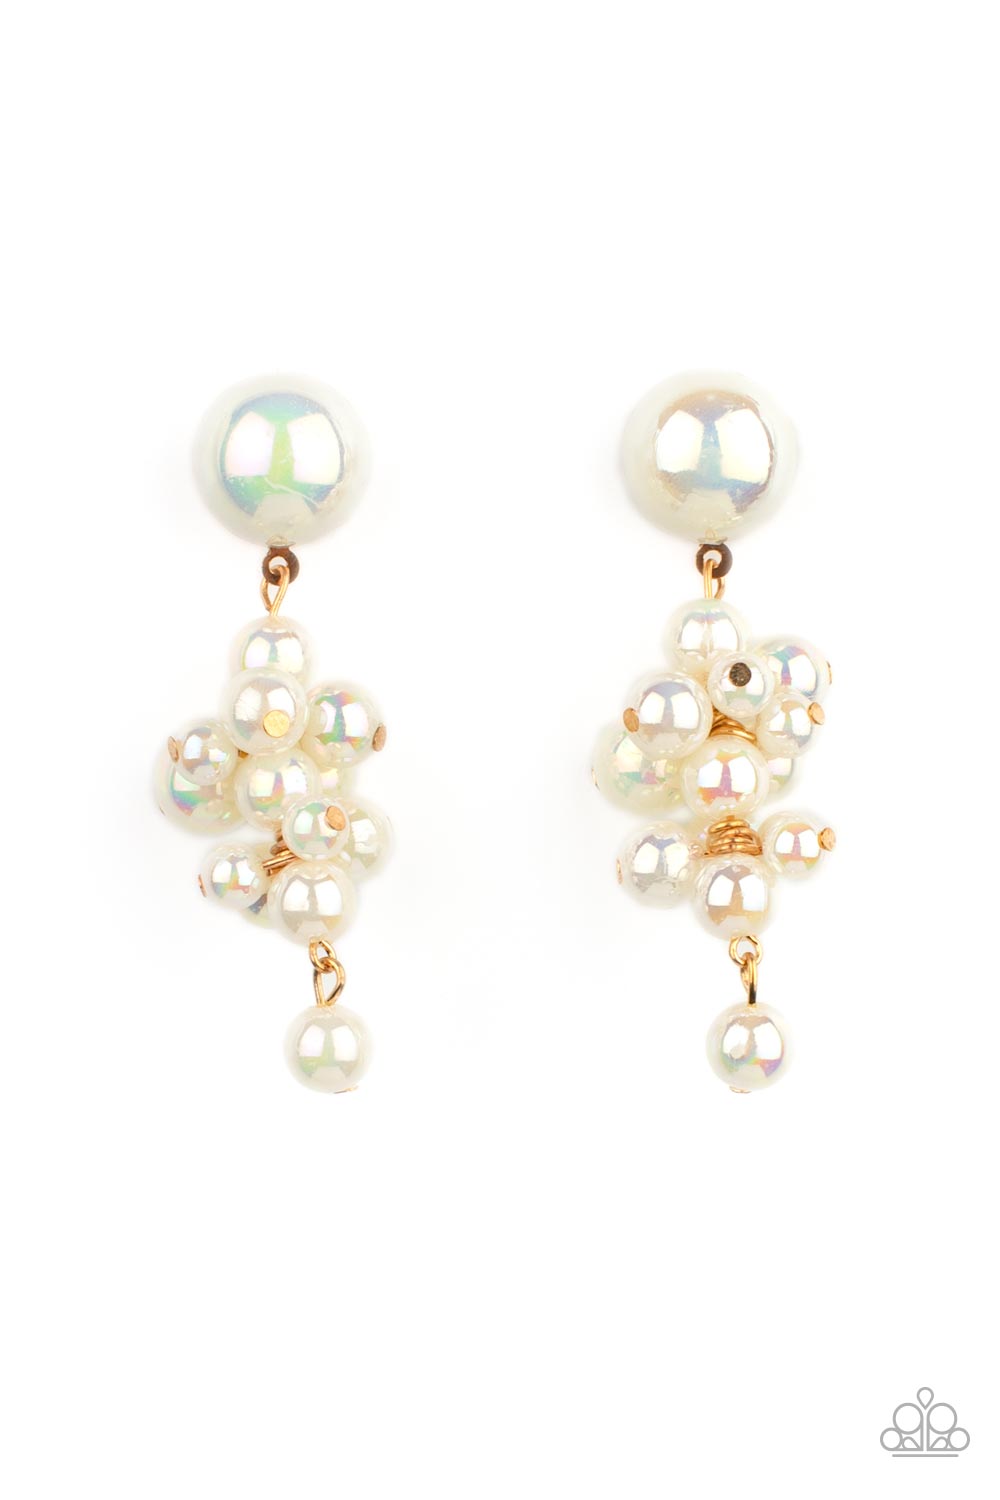 Paparazzi Don't Rock The YACHT Gold Post Earrings - P5PO-GDXX-151XX